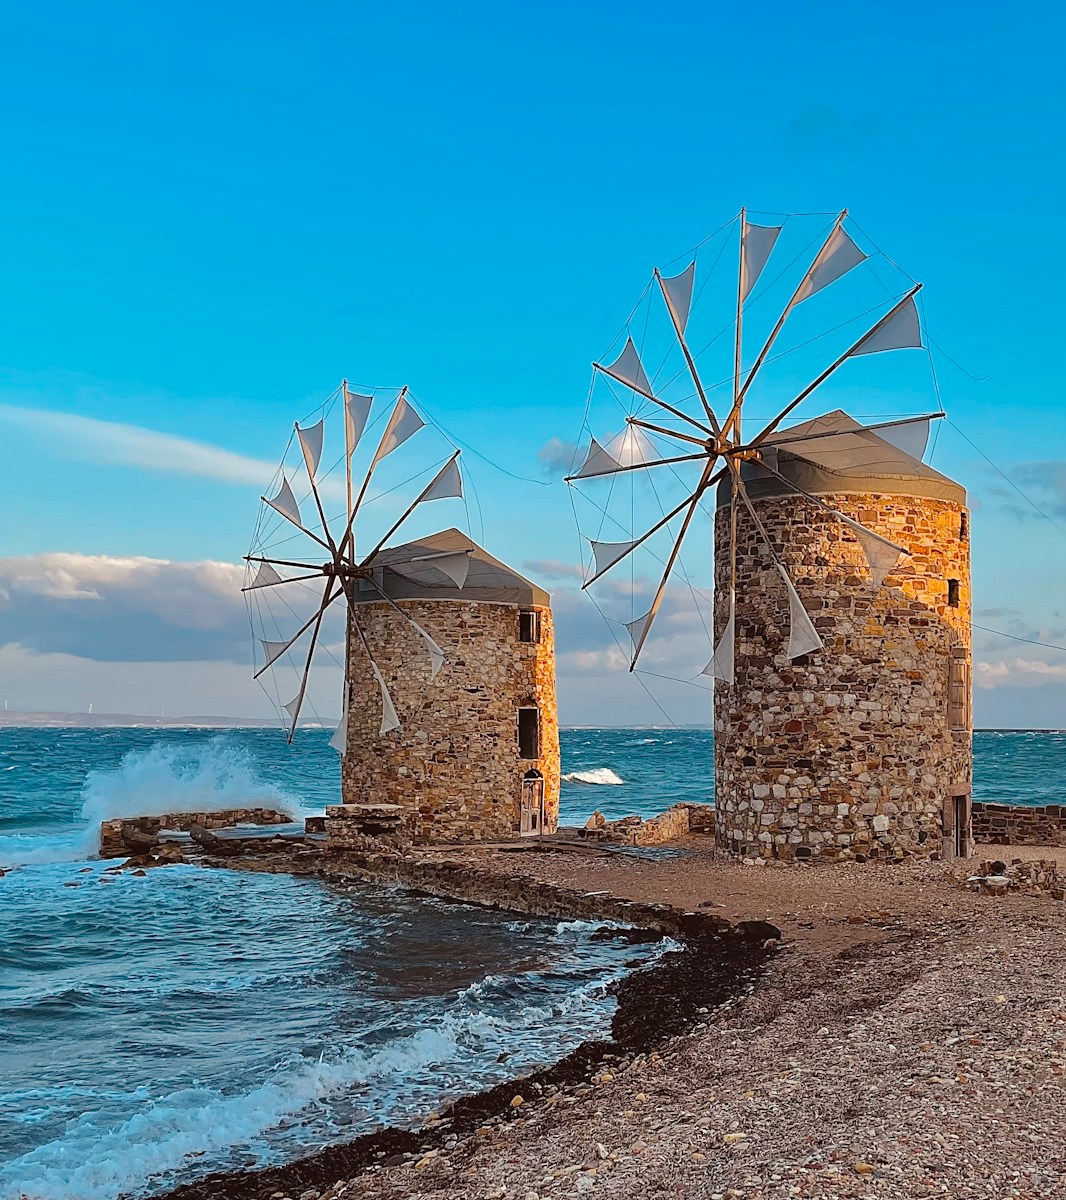 windmills on a beach with Chios in the background